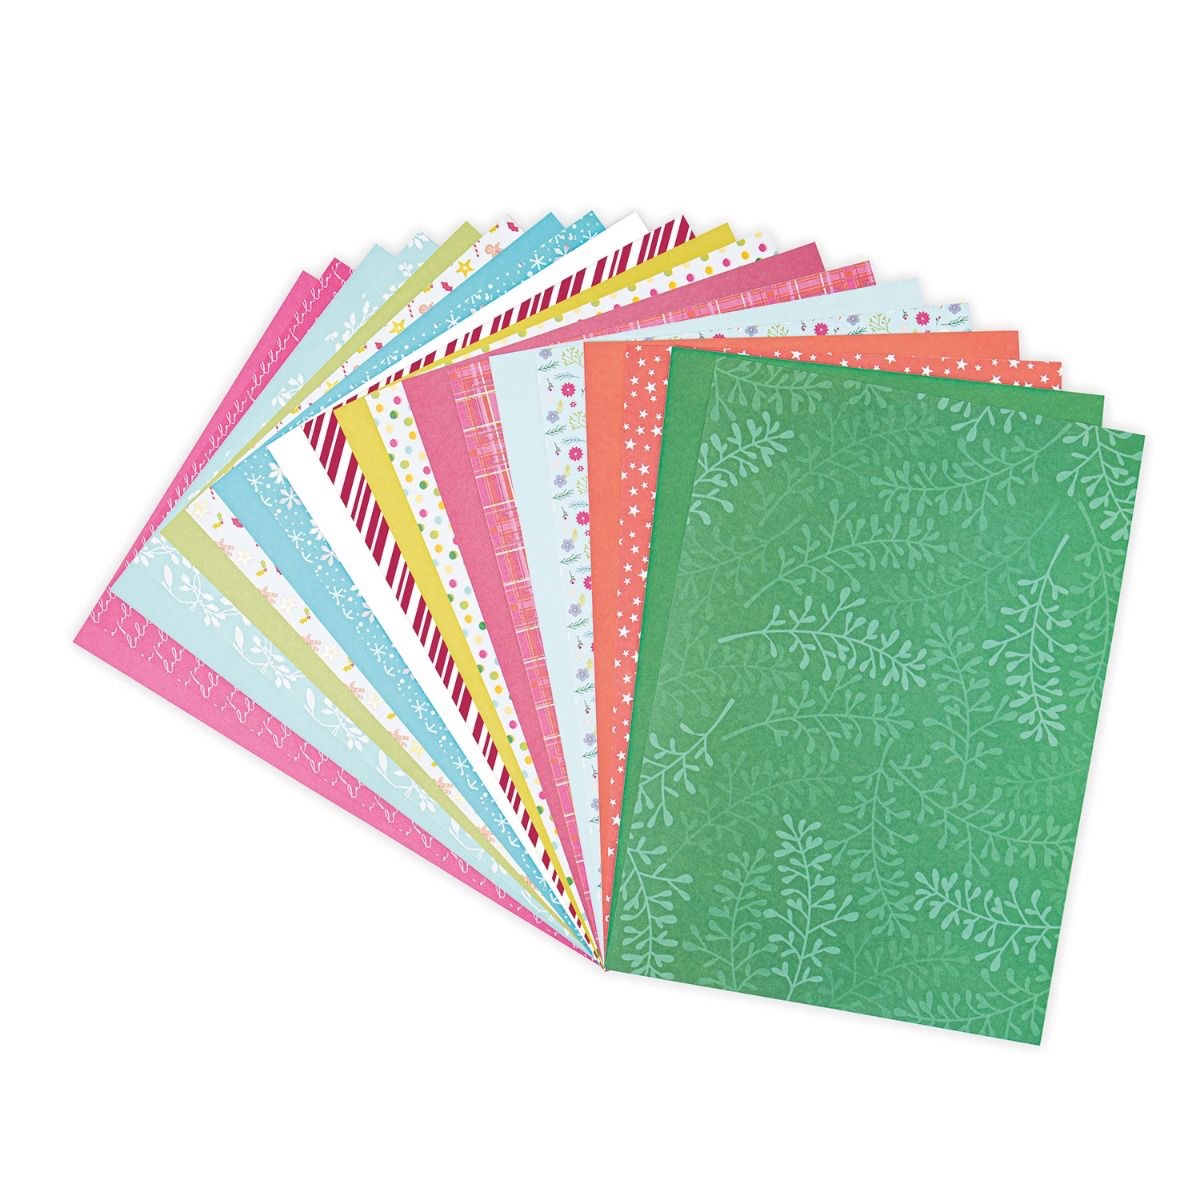 A4 PATTERNED PAPER